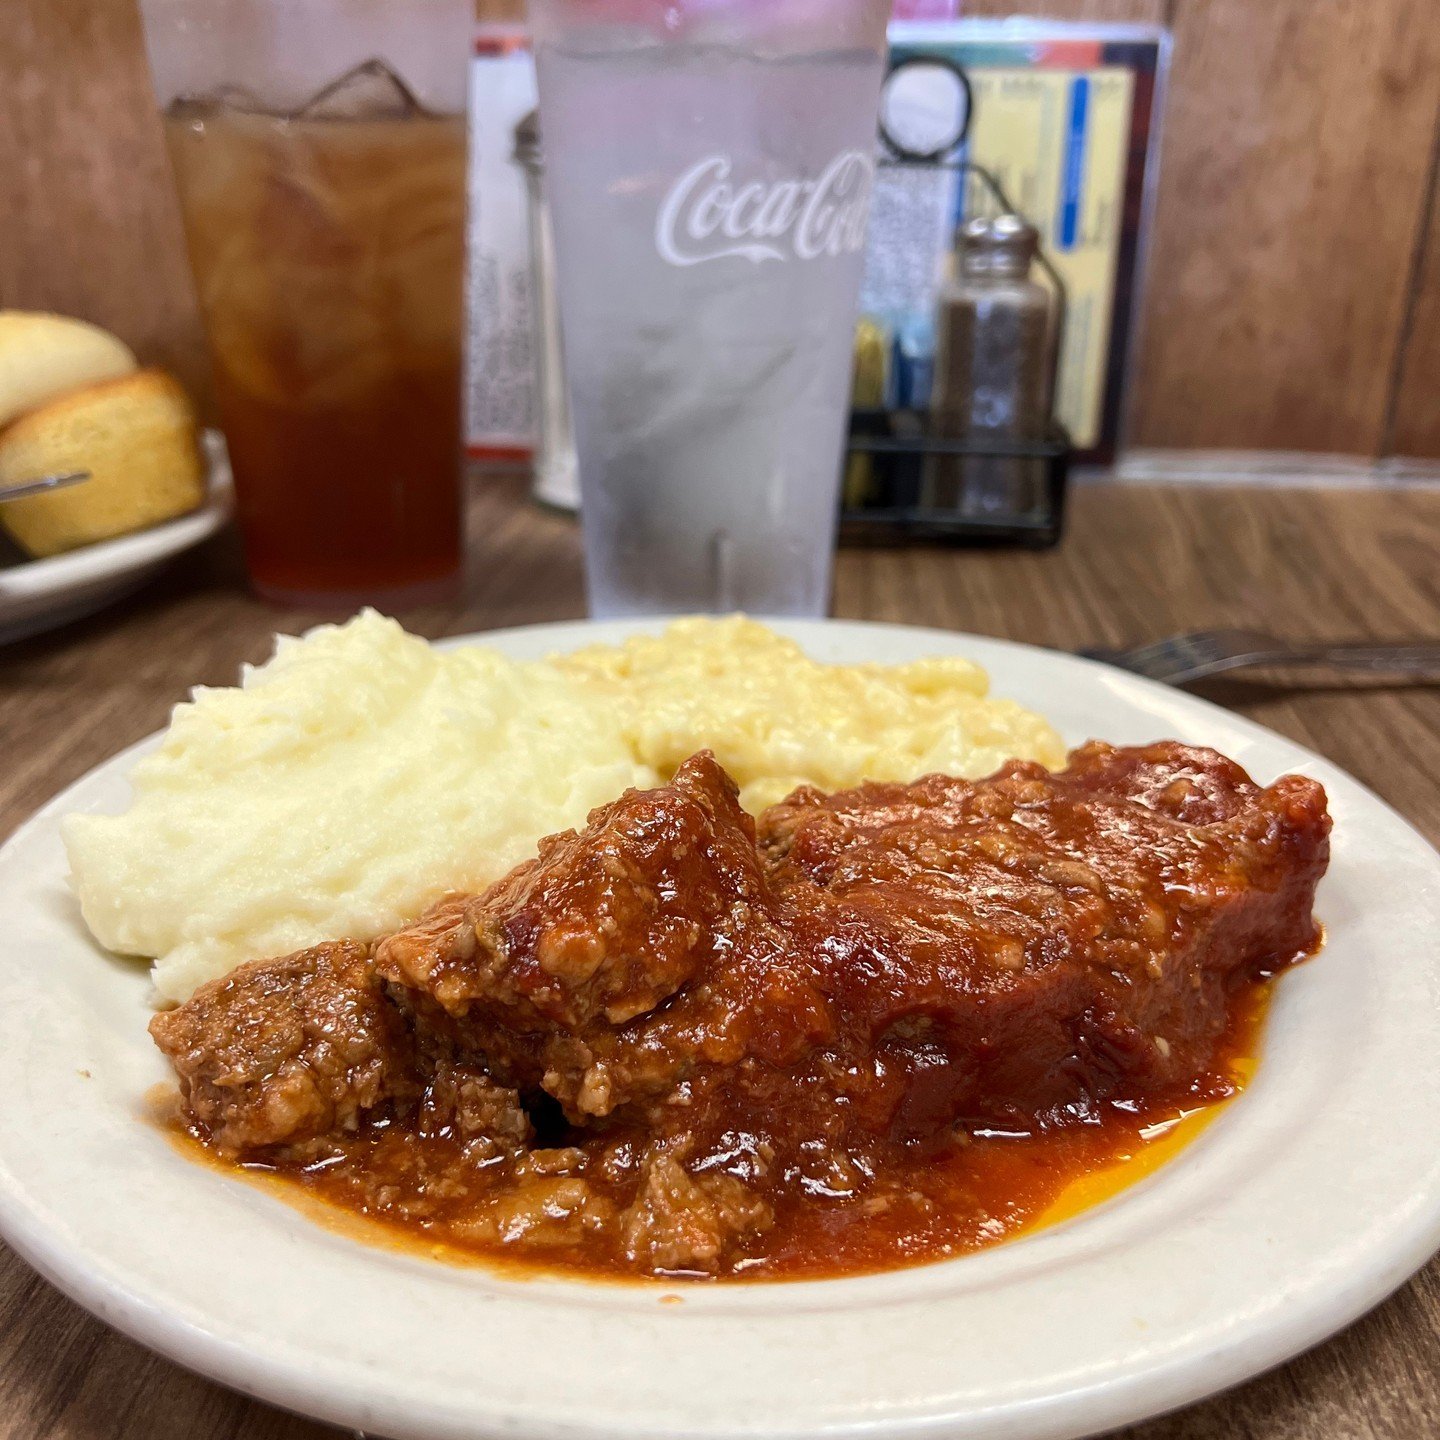 Our meatloaf is like a culinary comfort hug on a plate ... making you wanna come back for seconds!
🍽
#wendellsmithsrestaurant #wendellsmiths #nashvilletn #nashvillemeatn3 #meatn3 #countrycooking #southernfood #downhomecooking